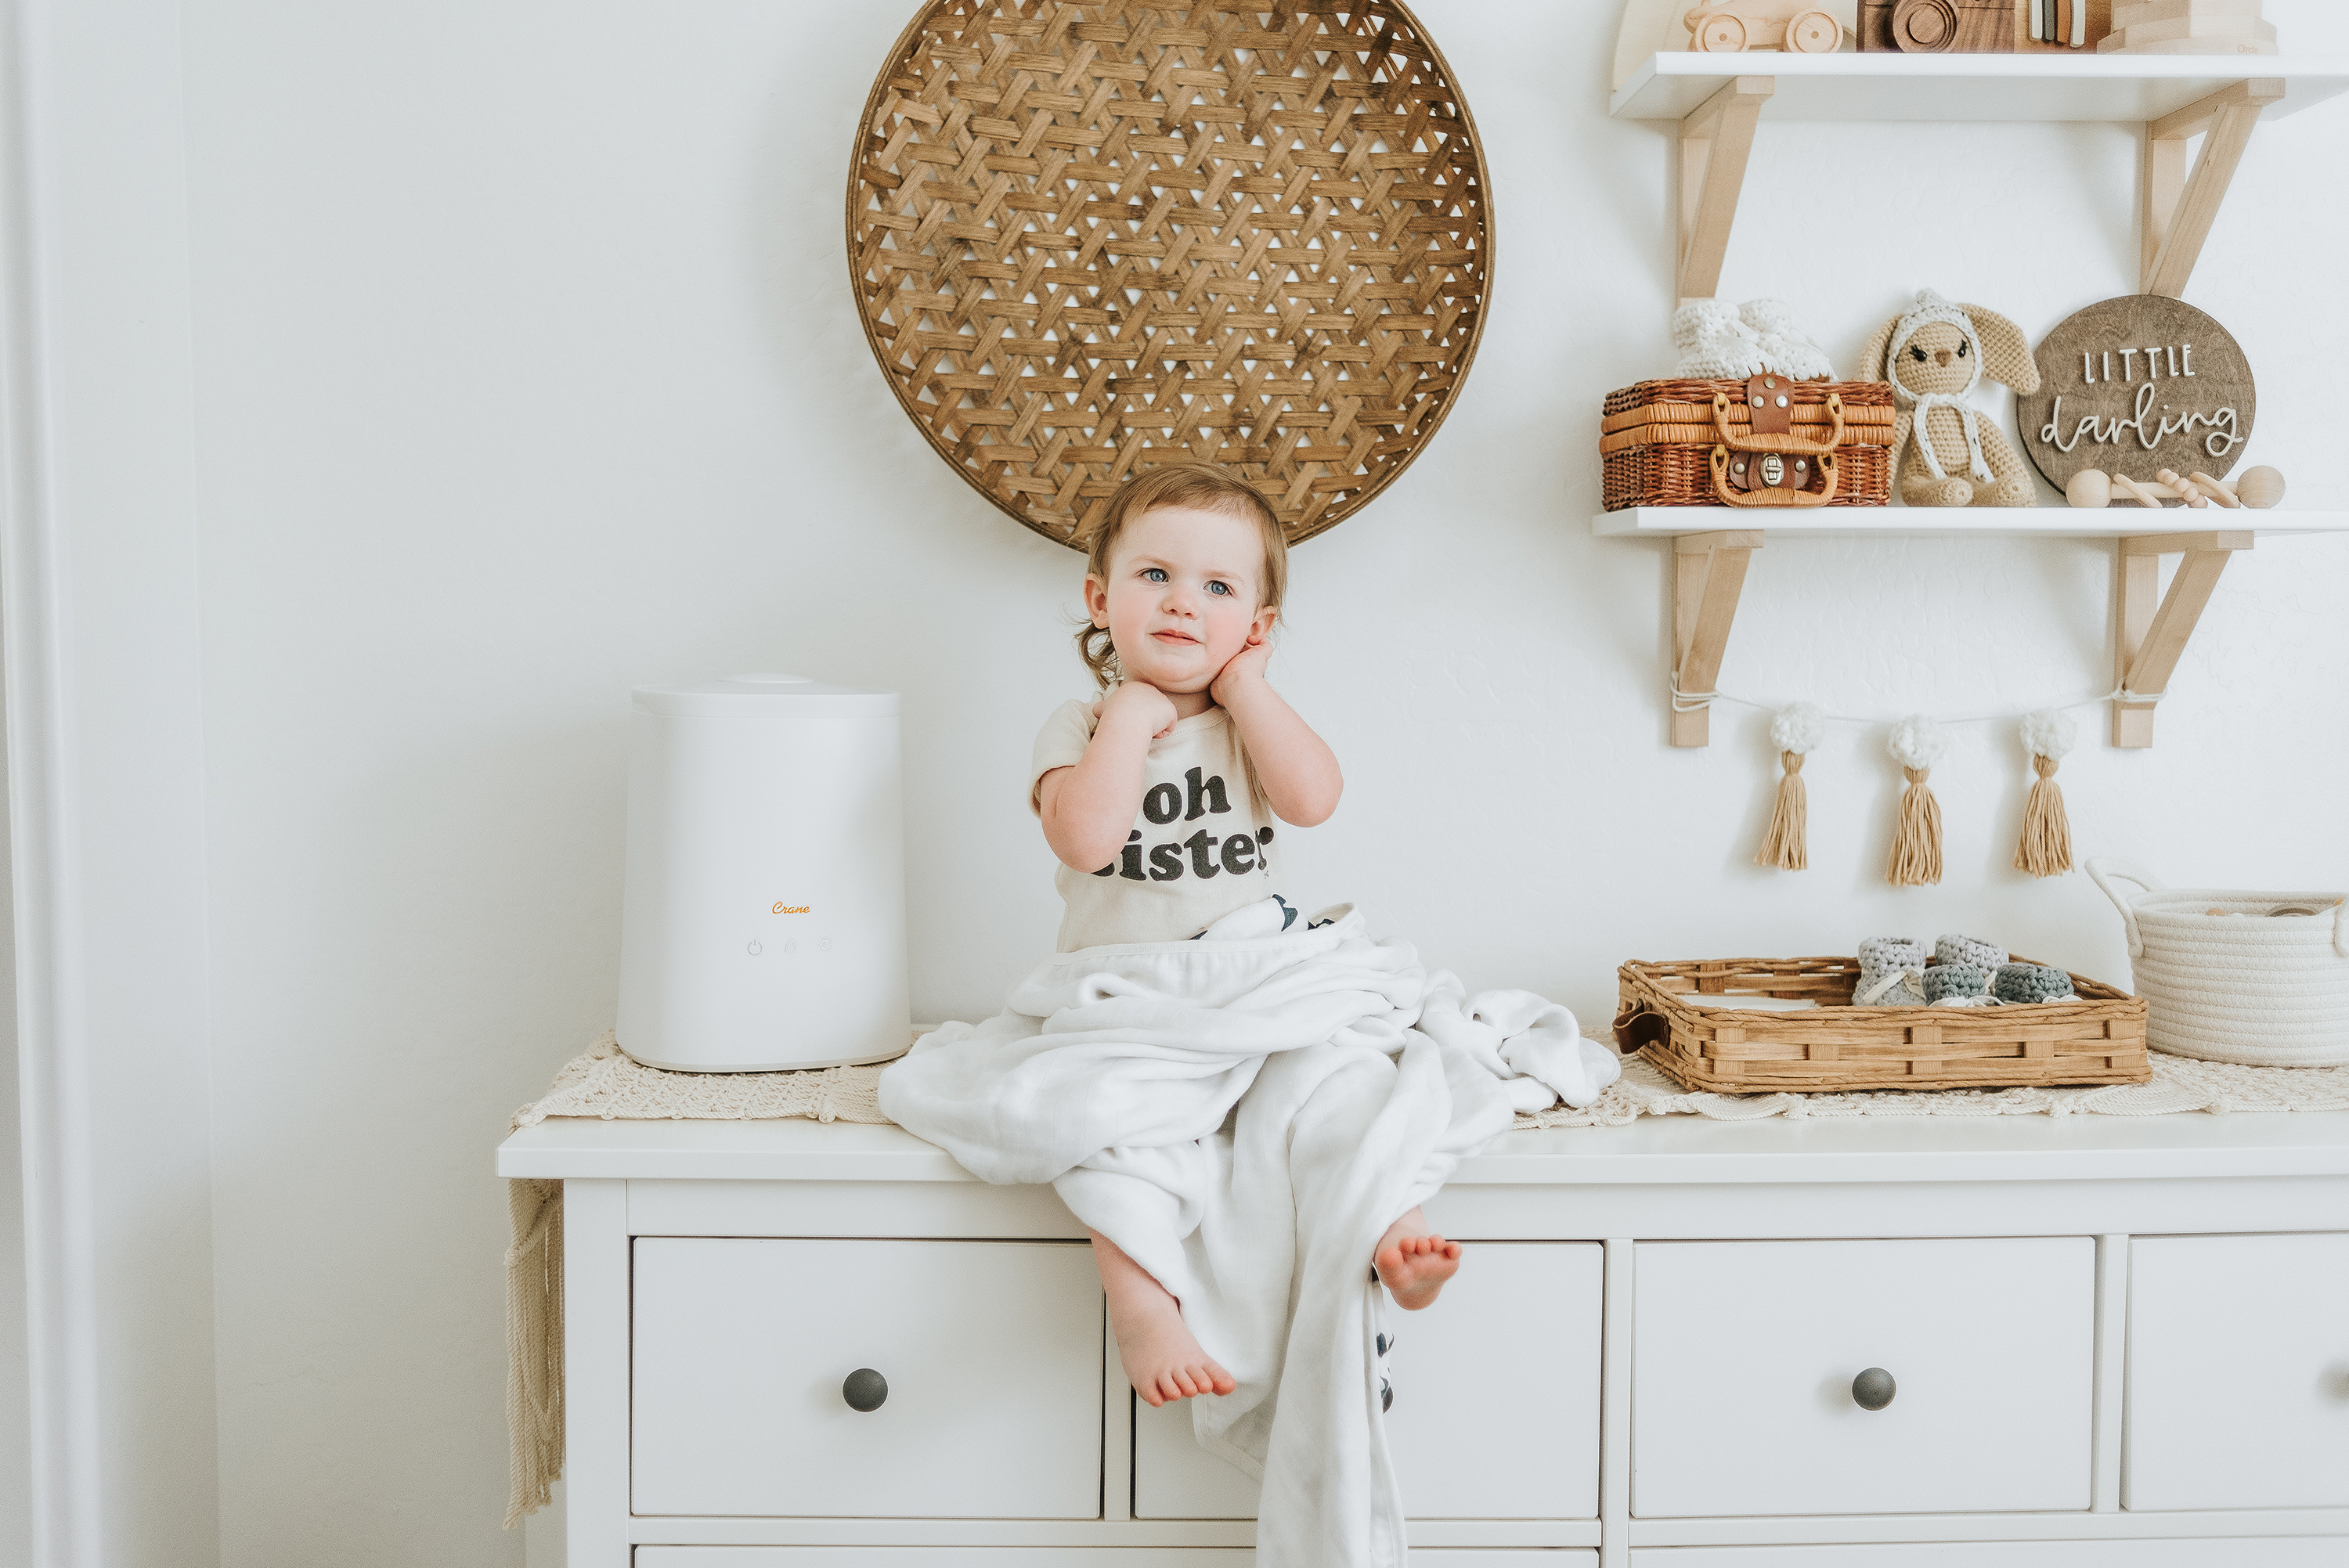 Setting up Your Child’s Nursery: Should You Invest in a Humidifier?